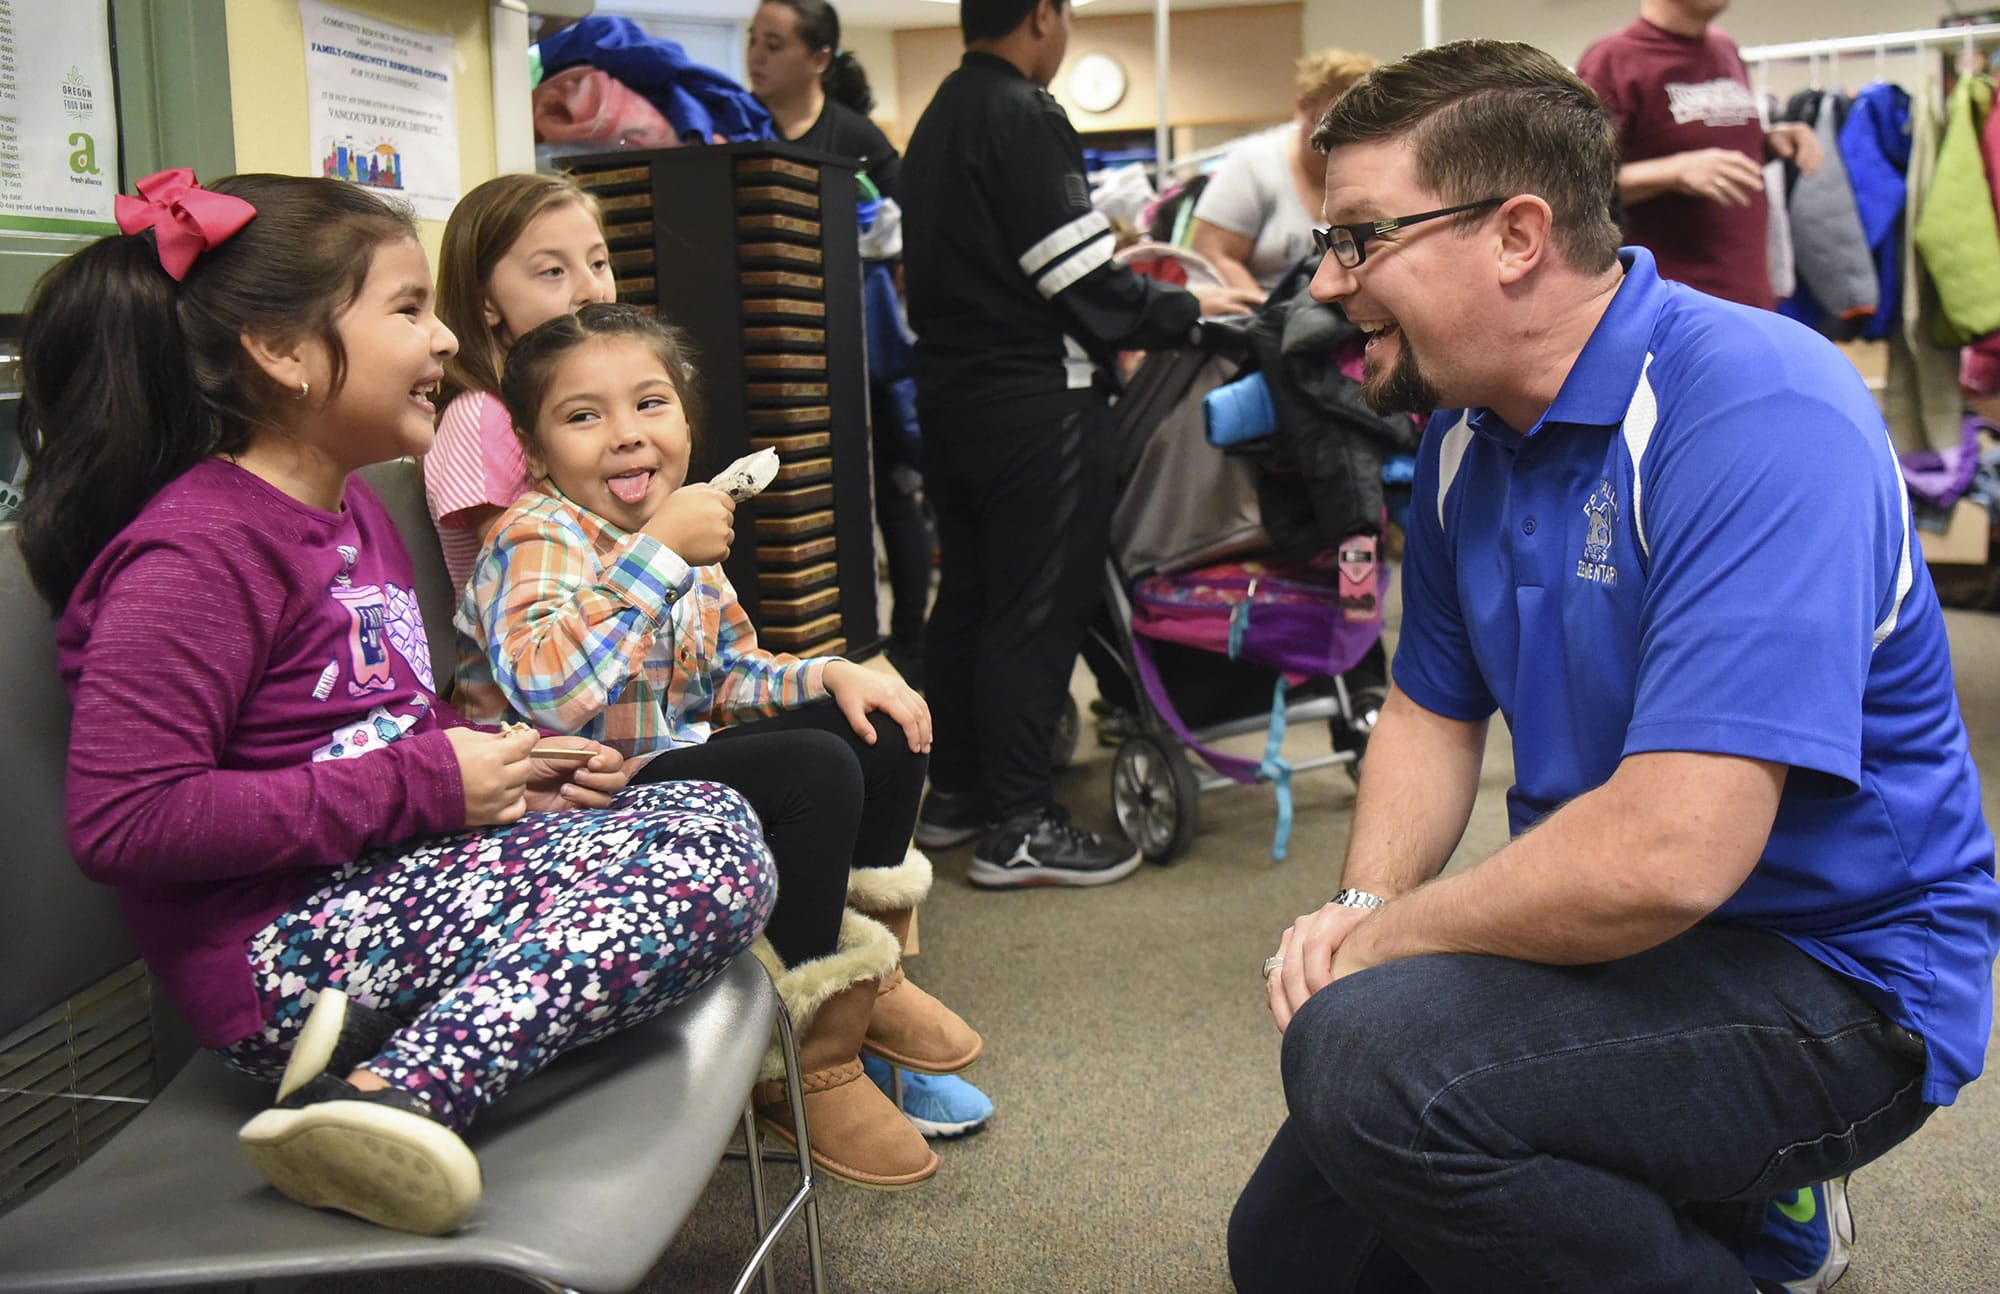 Fruit Valley Principal Matthew Fechter, right, talks to Emily Fargas, 6, from left, Arlet Aparicio, 5, and Giselle Betancourt, 9, while they eat ice cream Oct. 27 at the annual Fall Festival held at Fruit Valley Community Learning Center.